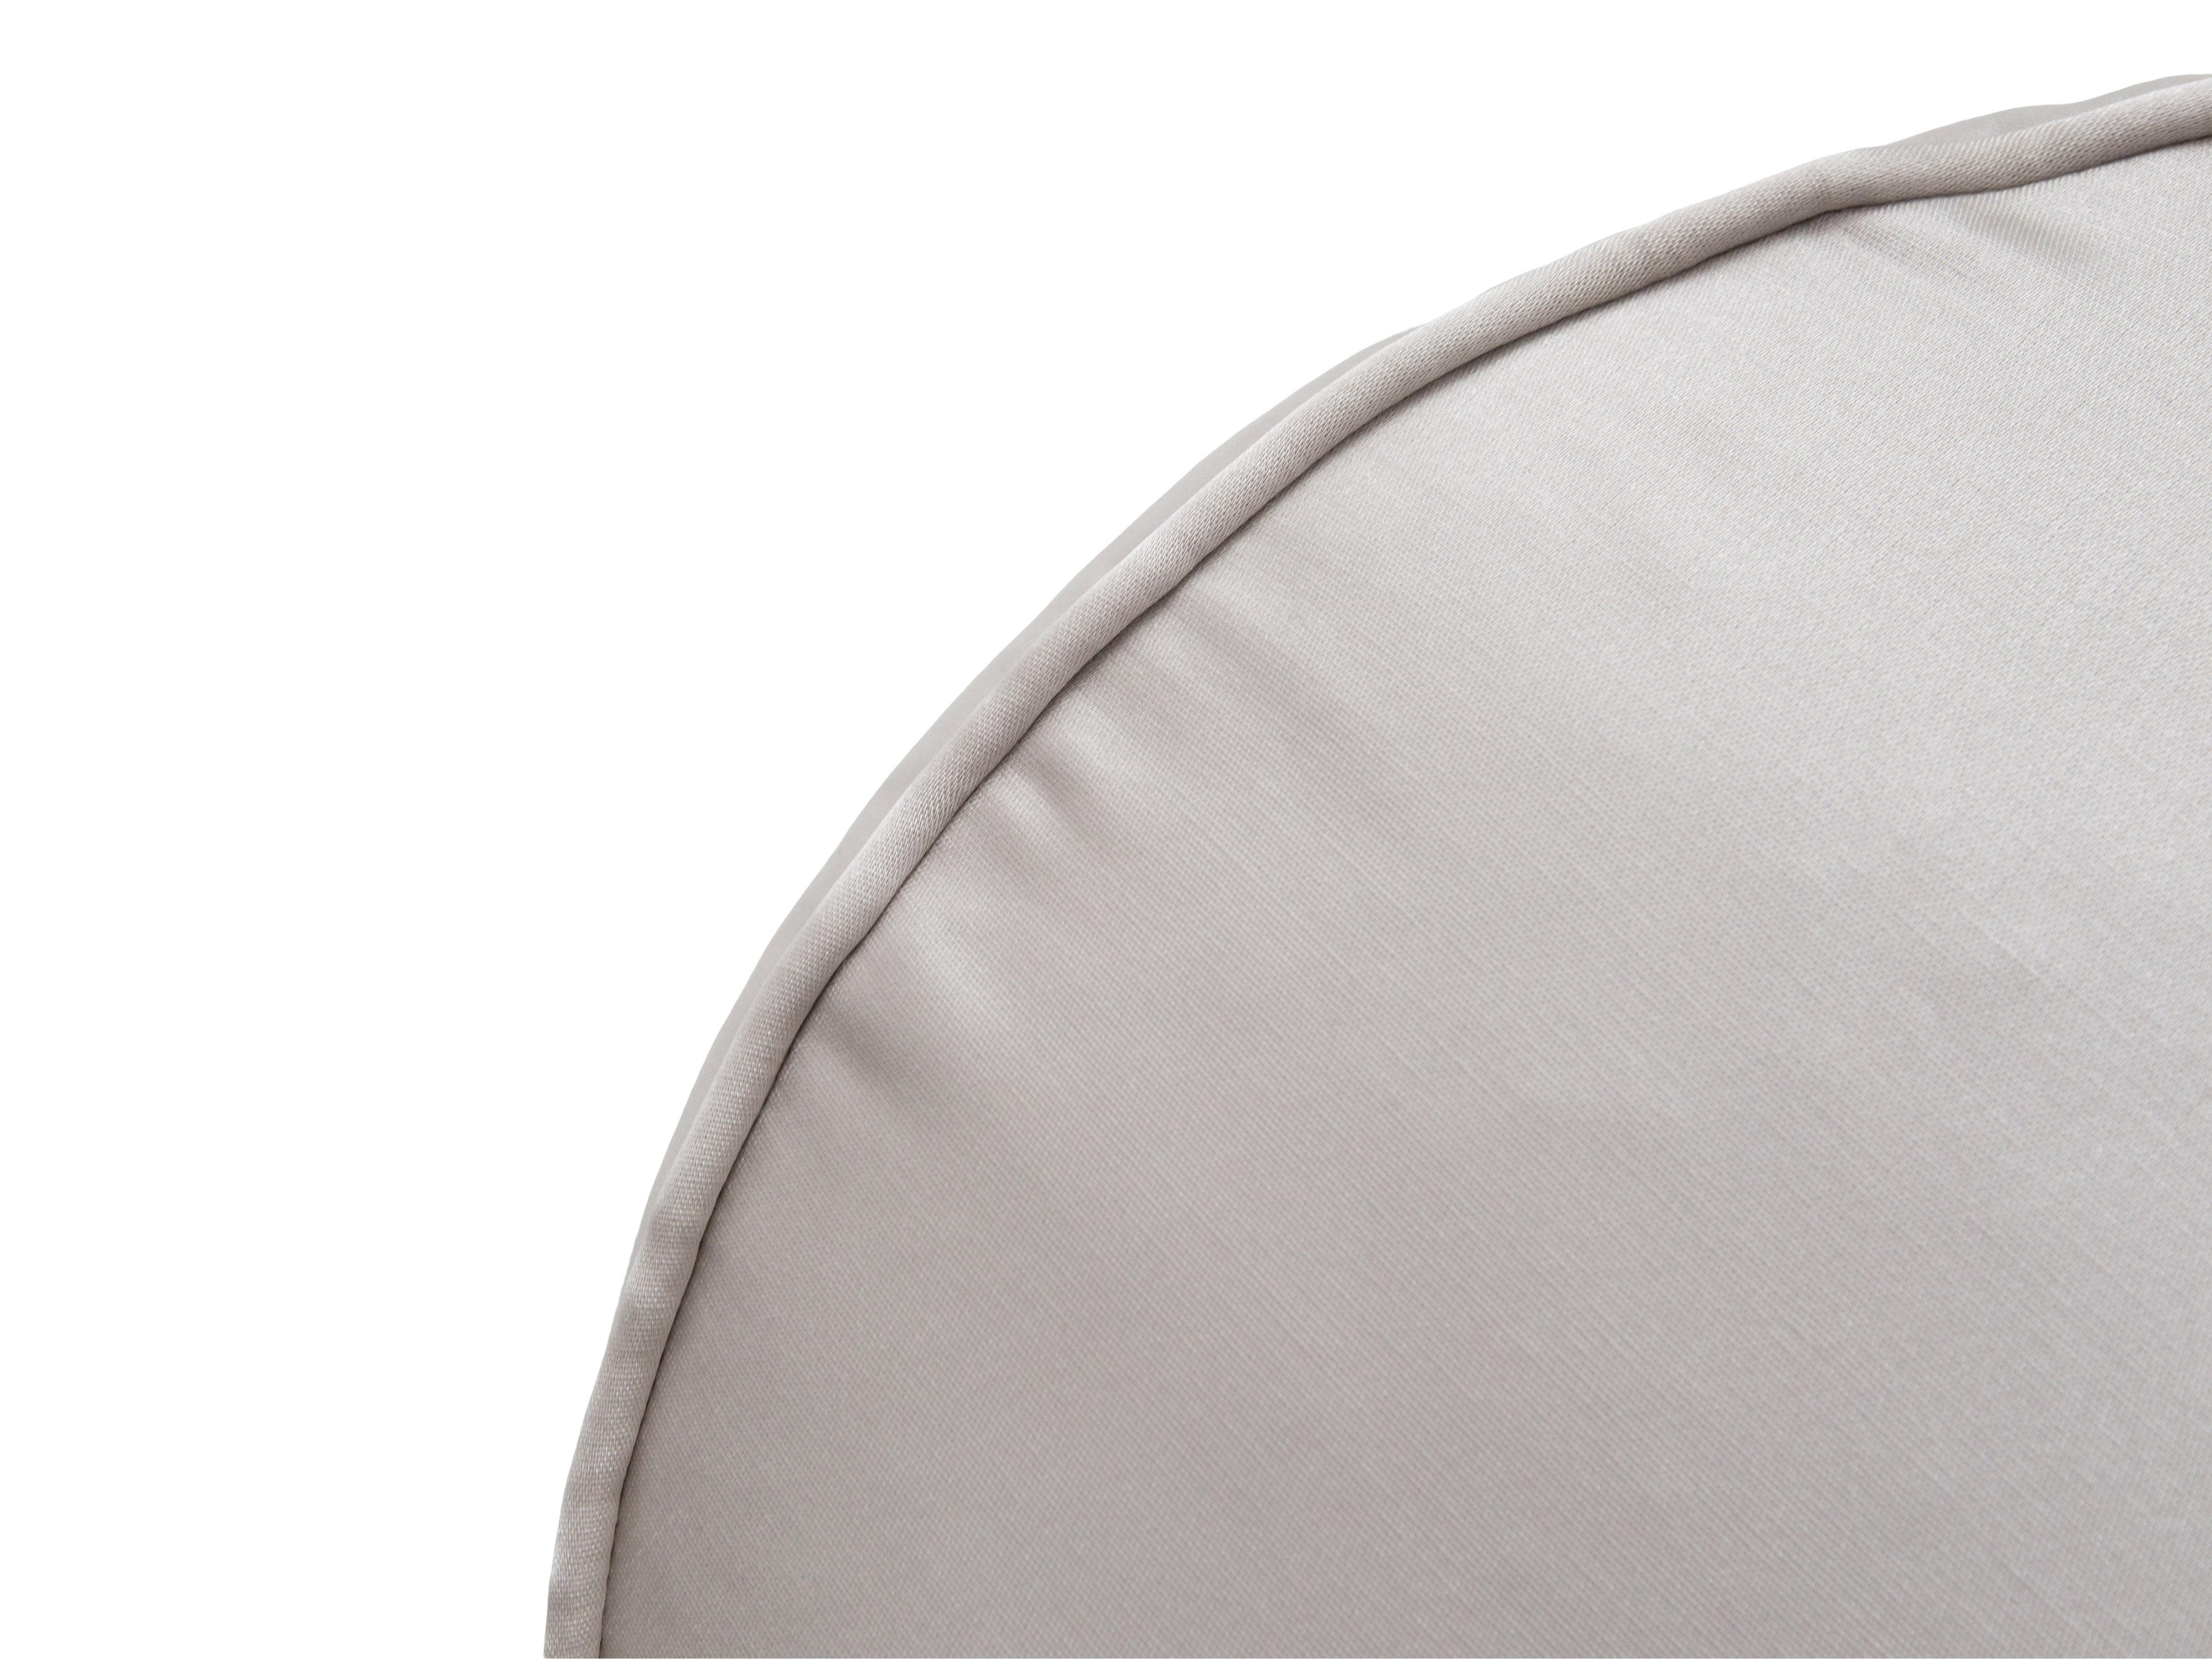 Lisa Tharp Collection  LT Signature Box Pillow - Round

Boxed sides lend distinctive form to signature pillows featured in many Lisa Tharp interiors. Lustrous fabric has subtle sheen and is machine washable. Insert included.

65% cotton, 35%